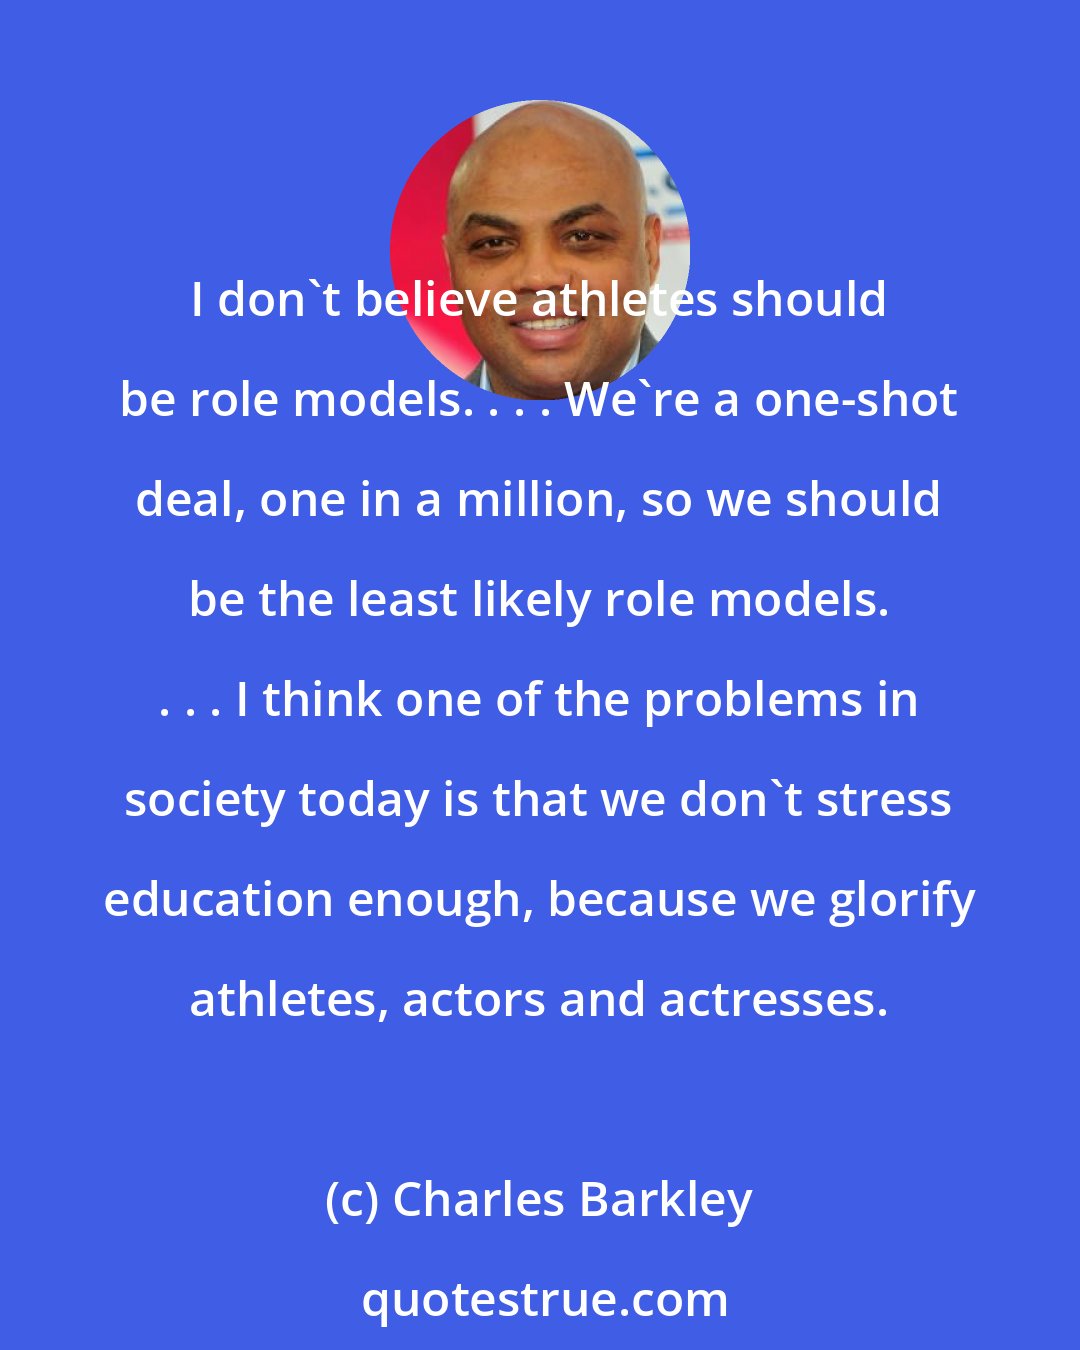 Charles Barkley: I don't believe athletes should be role models. . . . We're a one-shot deal, one in a million, so we should be the least likely role models. . . . I think one of the problems in society today is that we don't stress education enough, because we glorify athletes, actors and actresses.